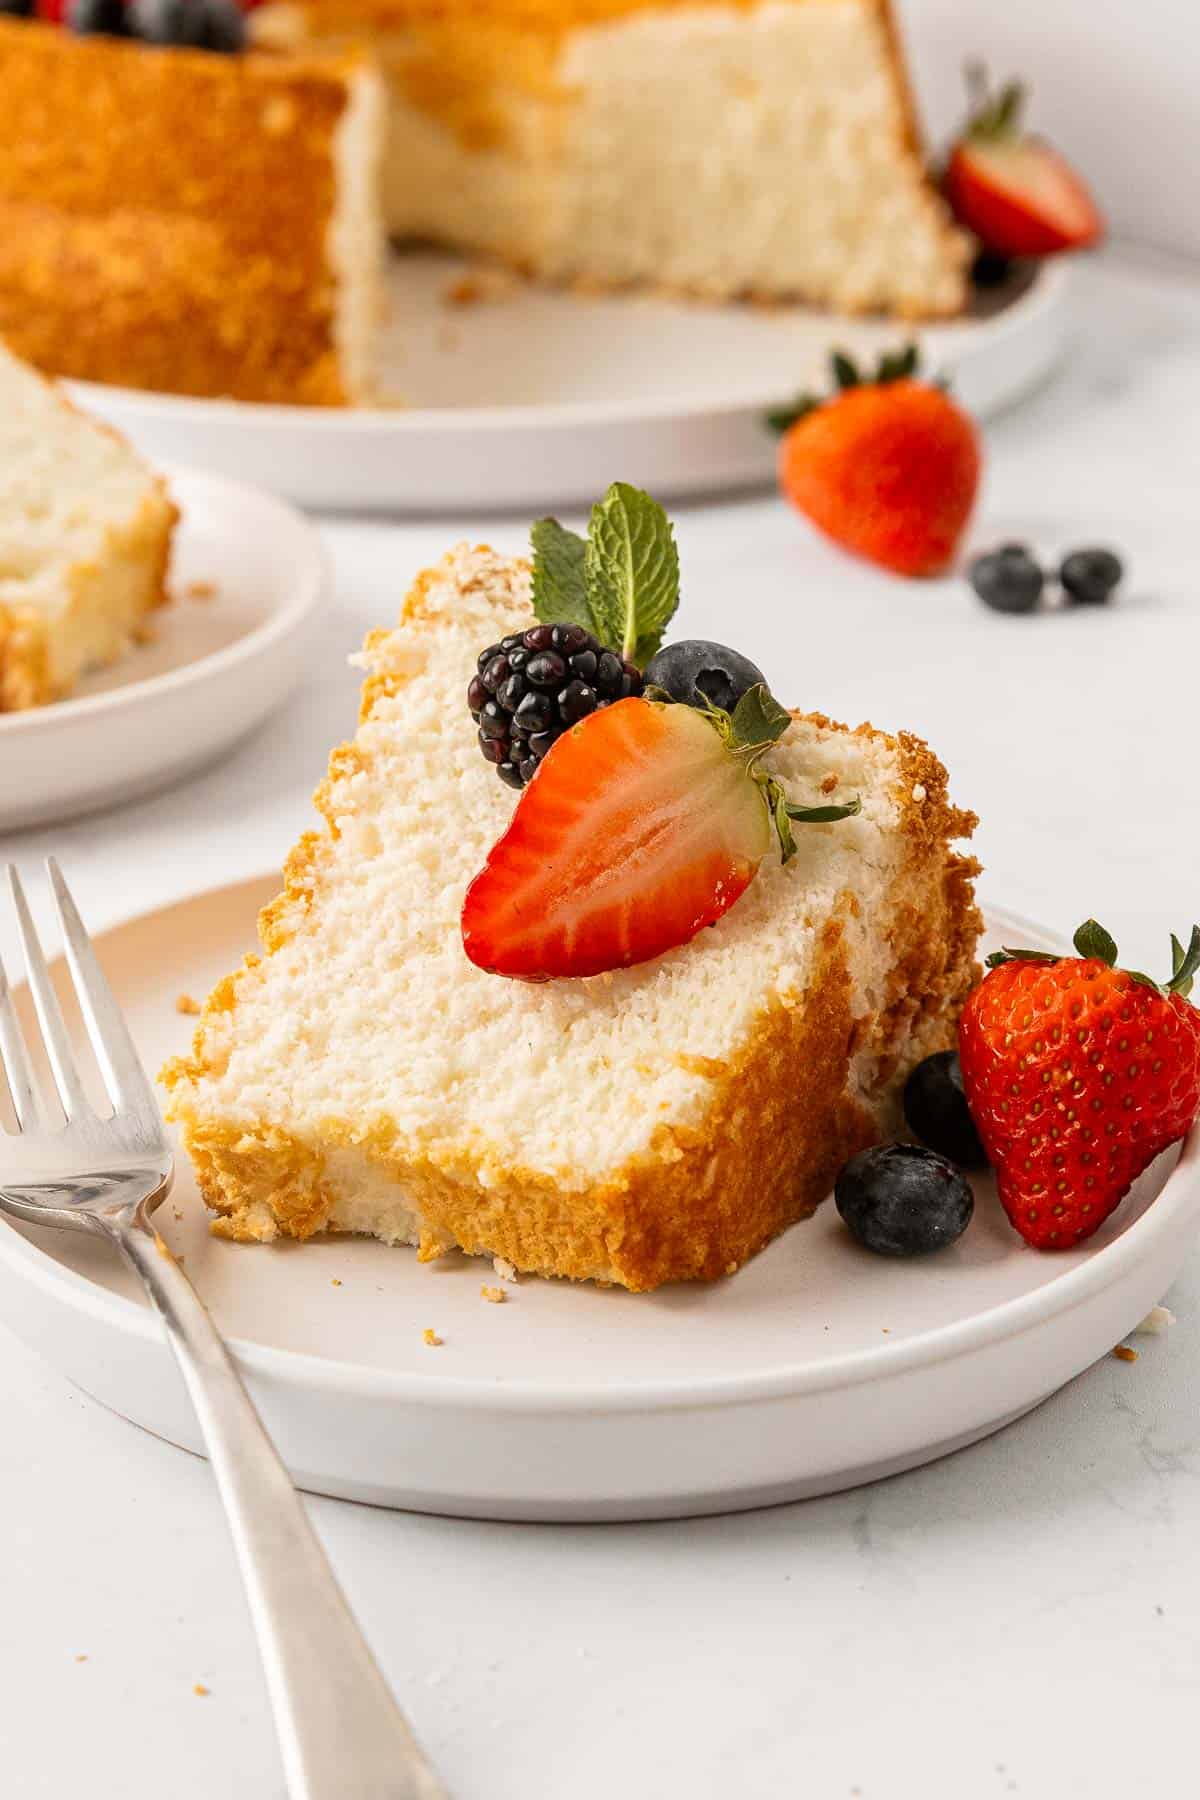 Slice of angel food cake on a plate topped with fresh berries and whole cake nearby.